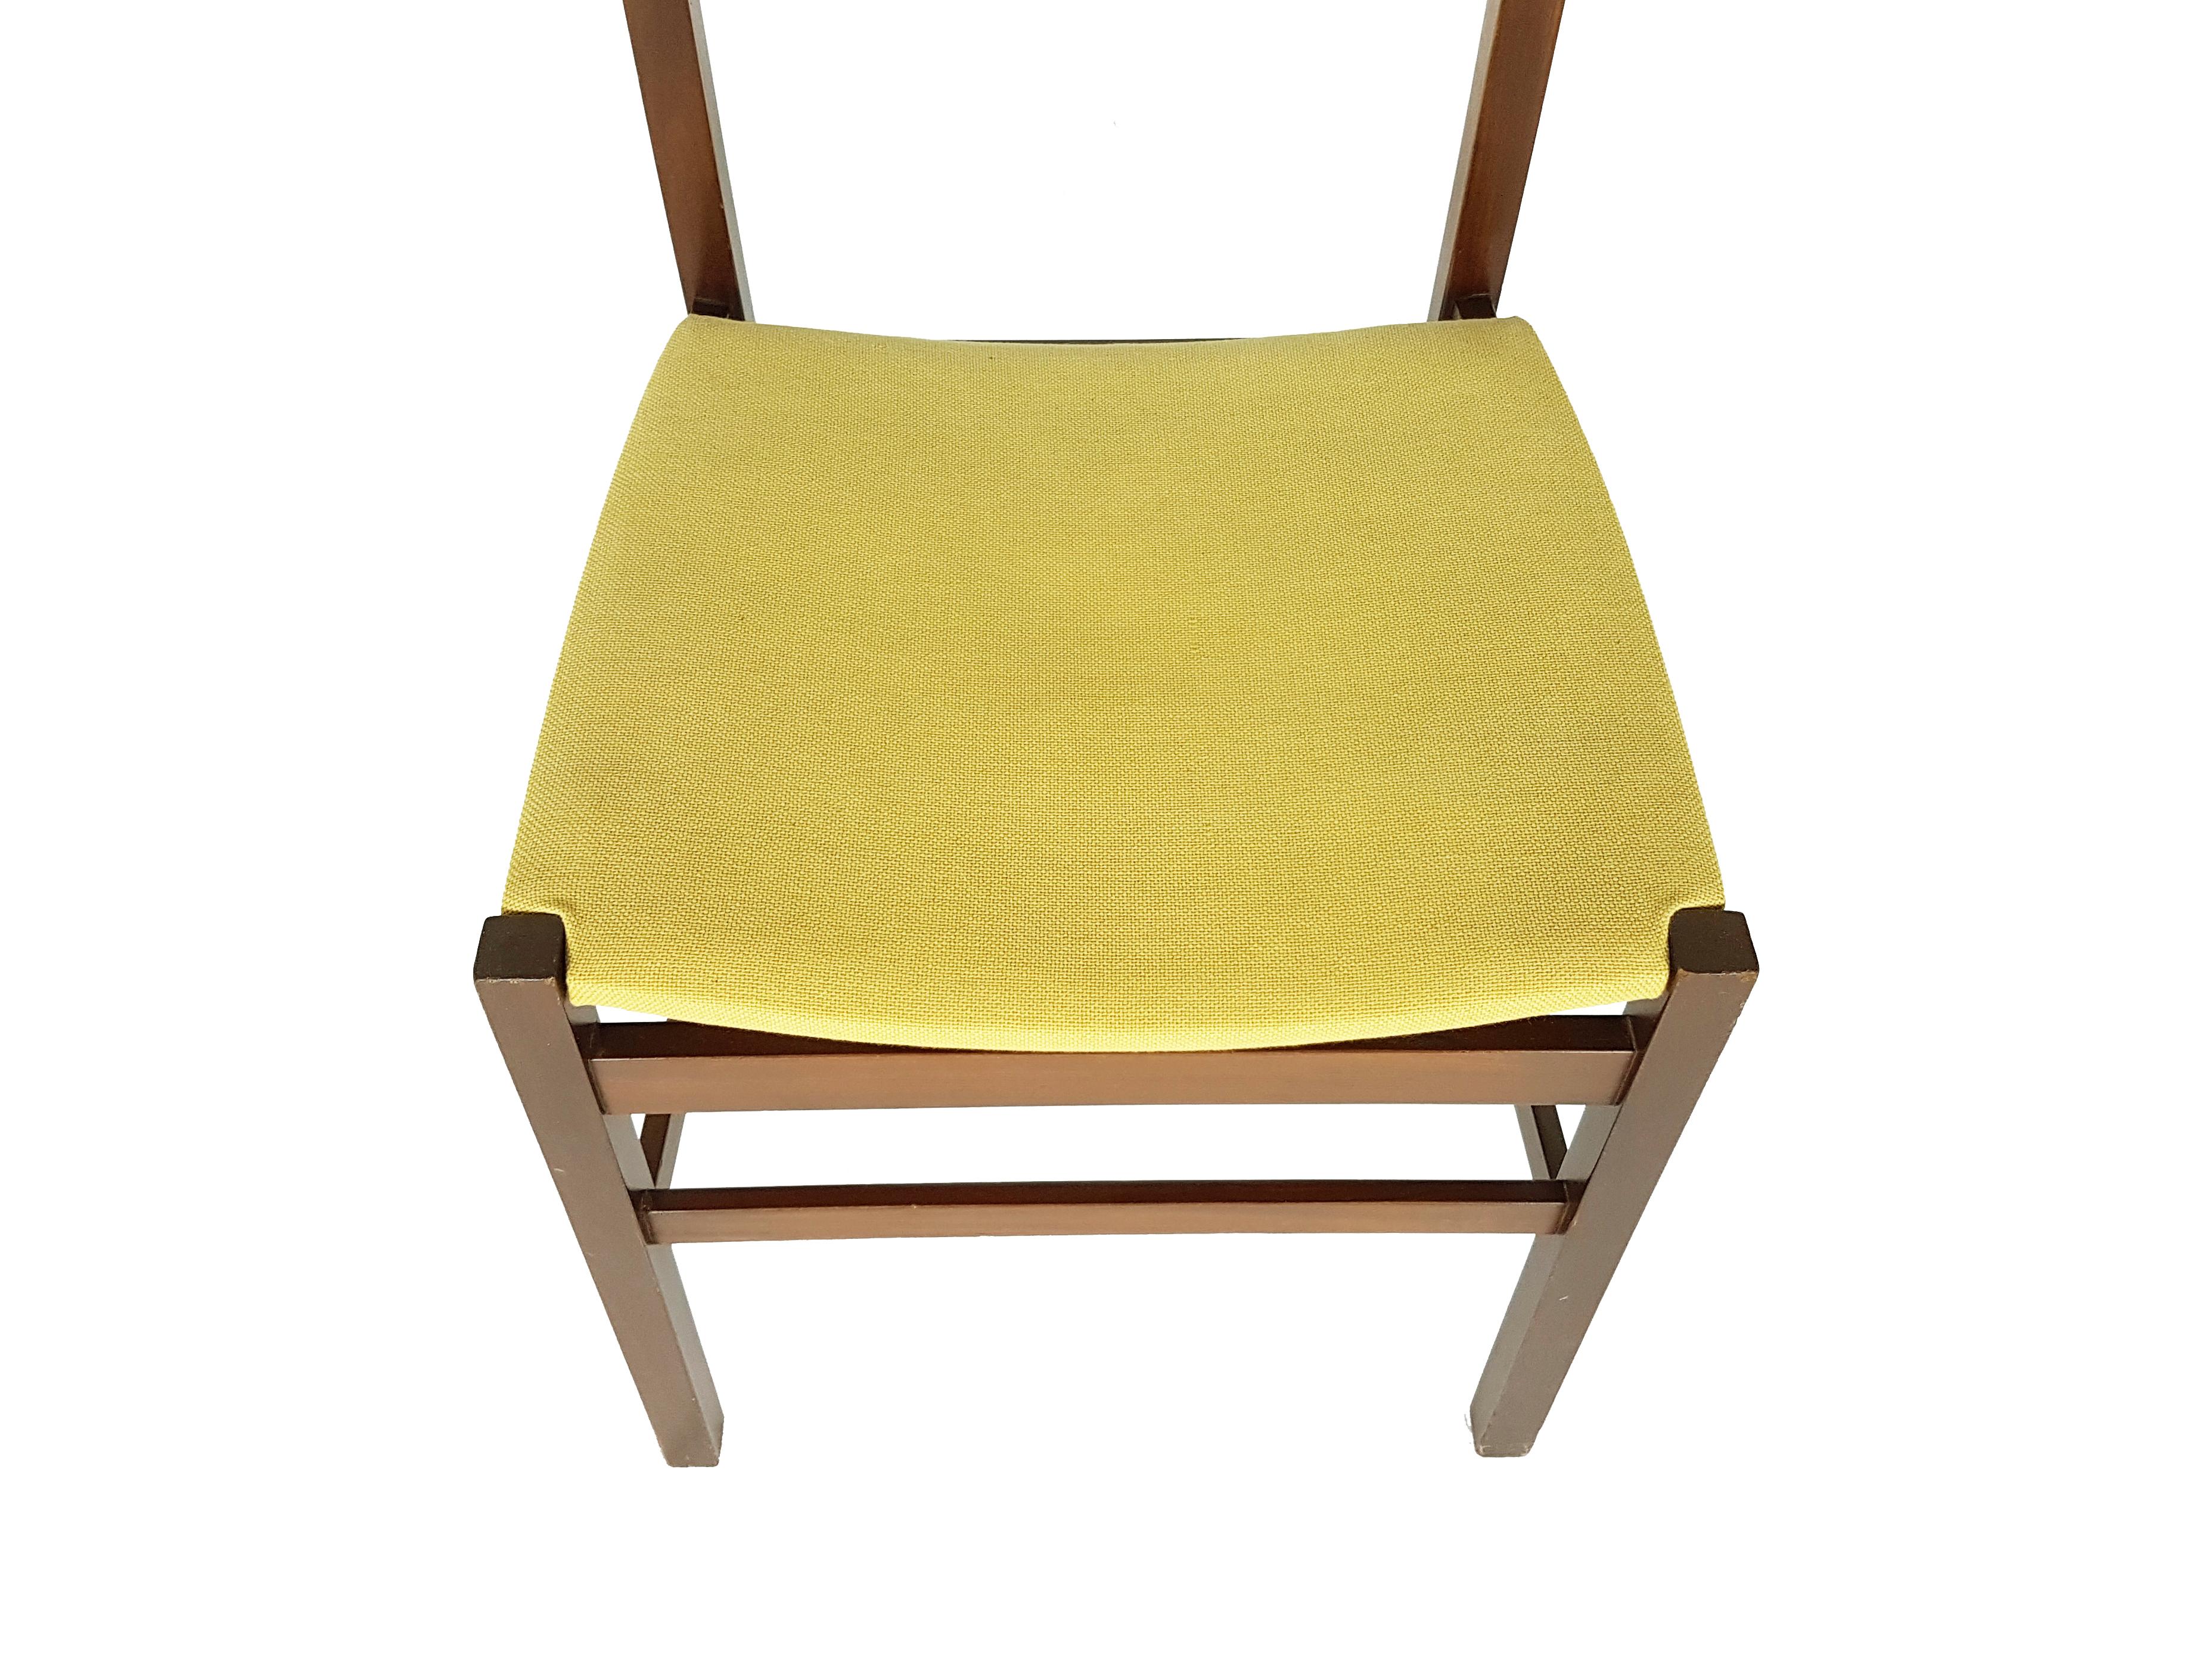 4 Italian Light Green & Wood 1960s Dining Chairs by Arch, Ramella for Sormani For Sale 2